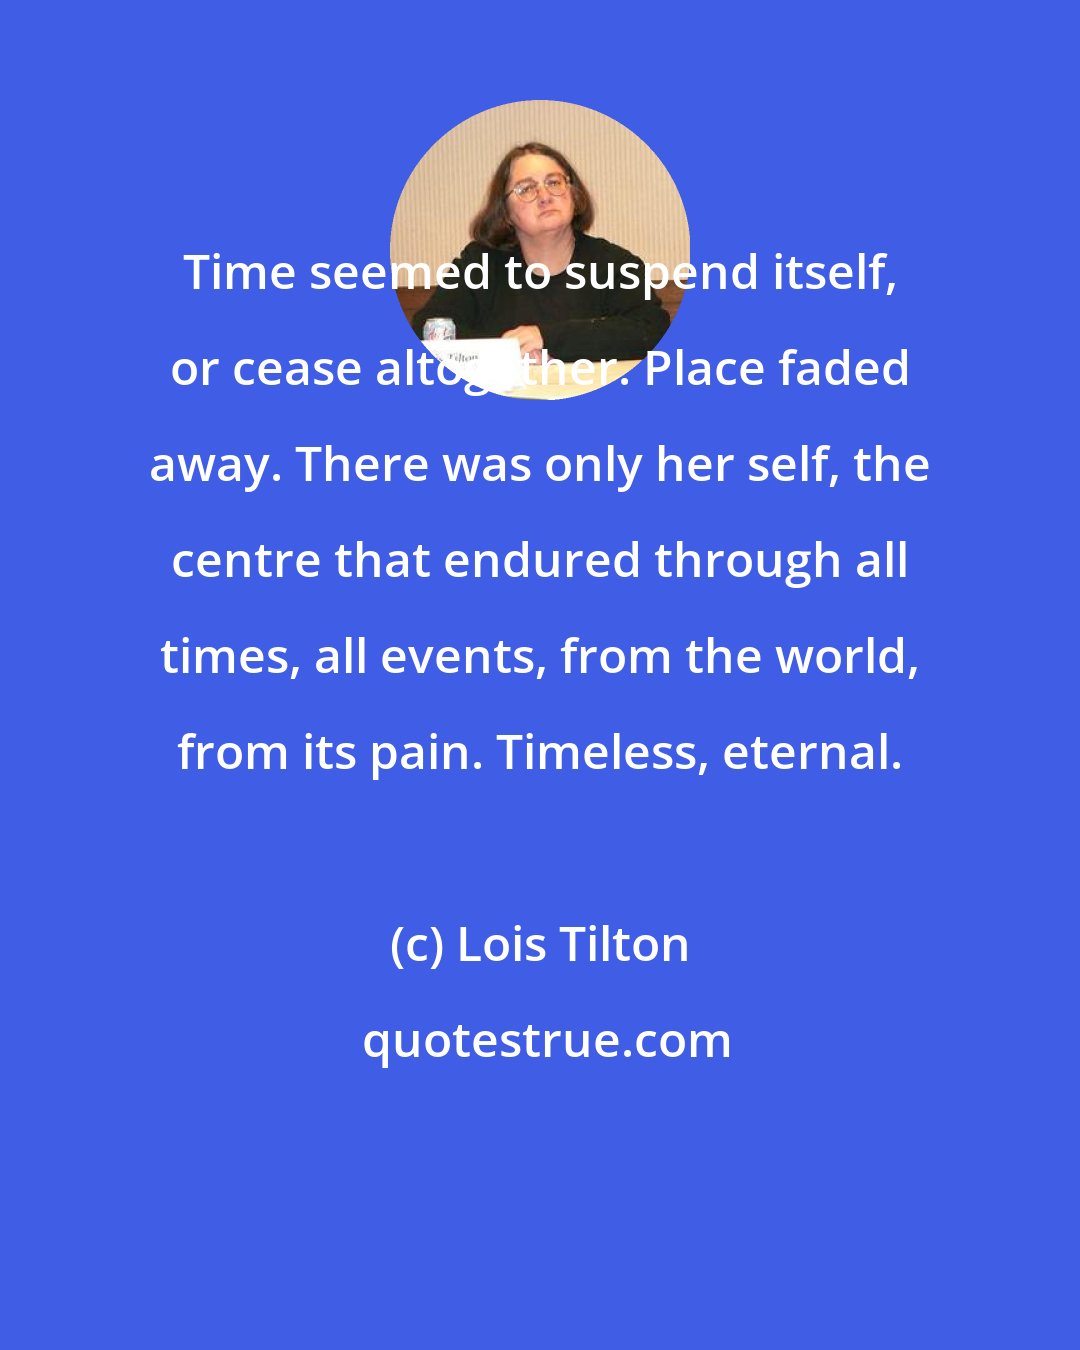 Lois Tilton: Time seemed to suspend itself, or cease altogether. Place faded away. There was only her self, the centre that endured through all times, all events, from the world, from its pain. Timeless, eternal.